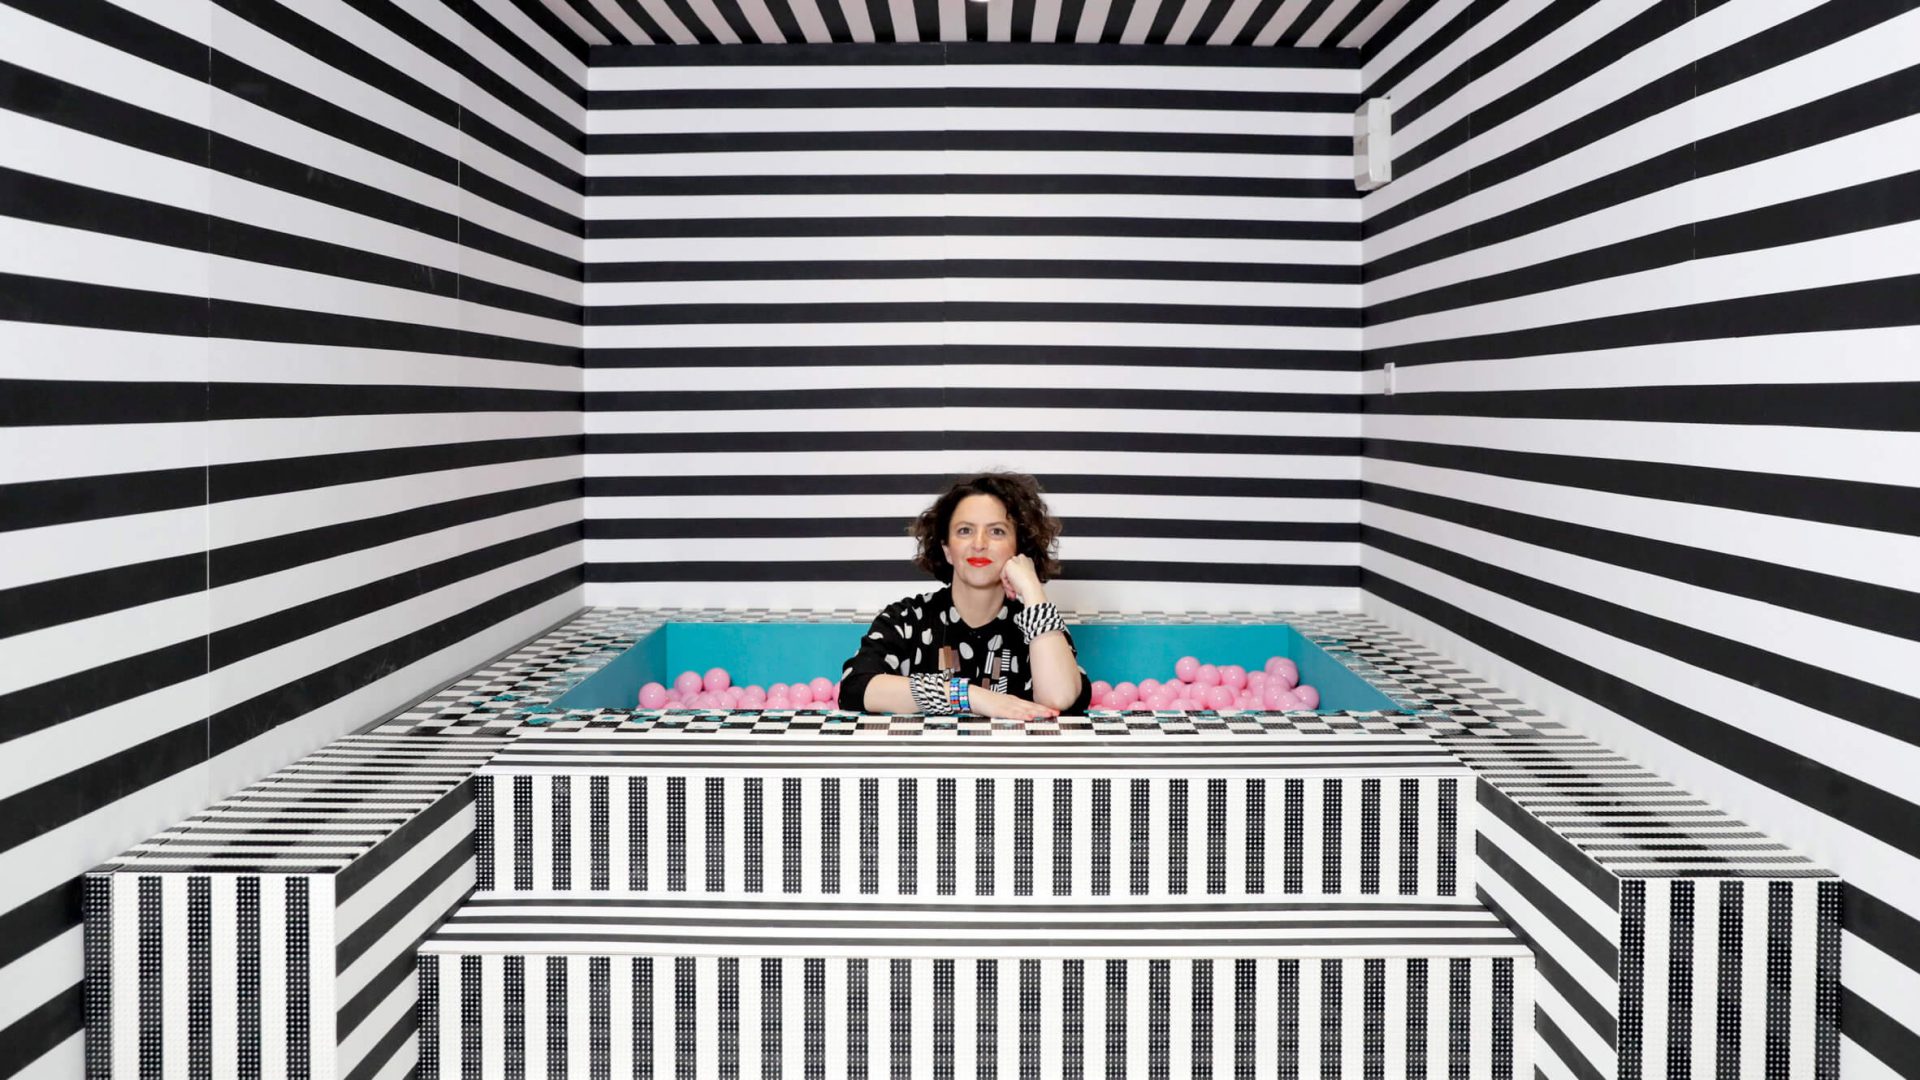 HOUSE OF DOTS - Camille Walala